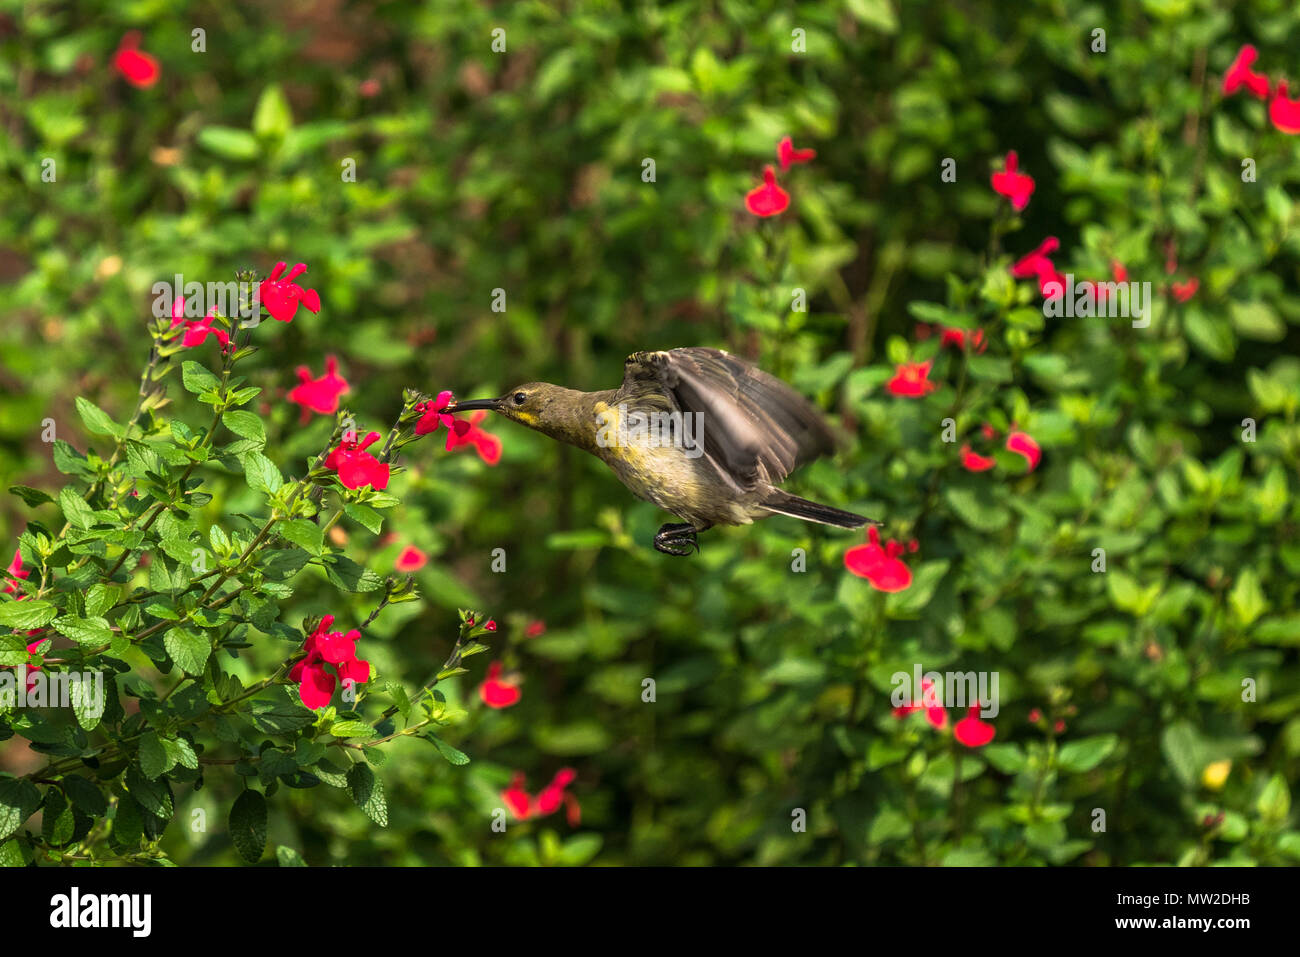 Sunbird in flight as it feeds on nectar from a red flower. Stock Photo